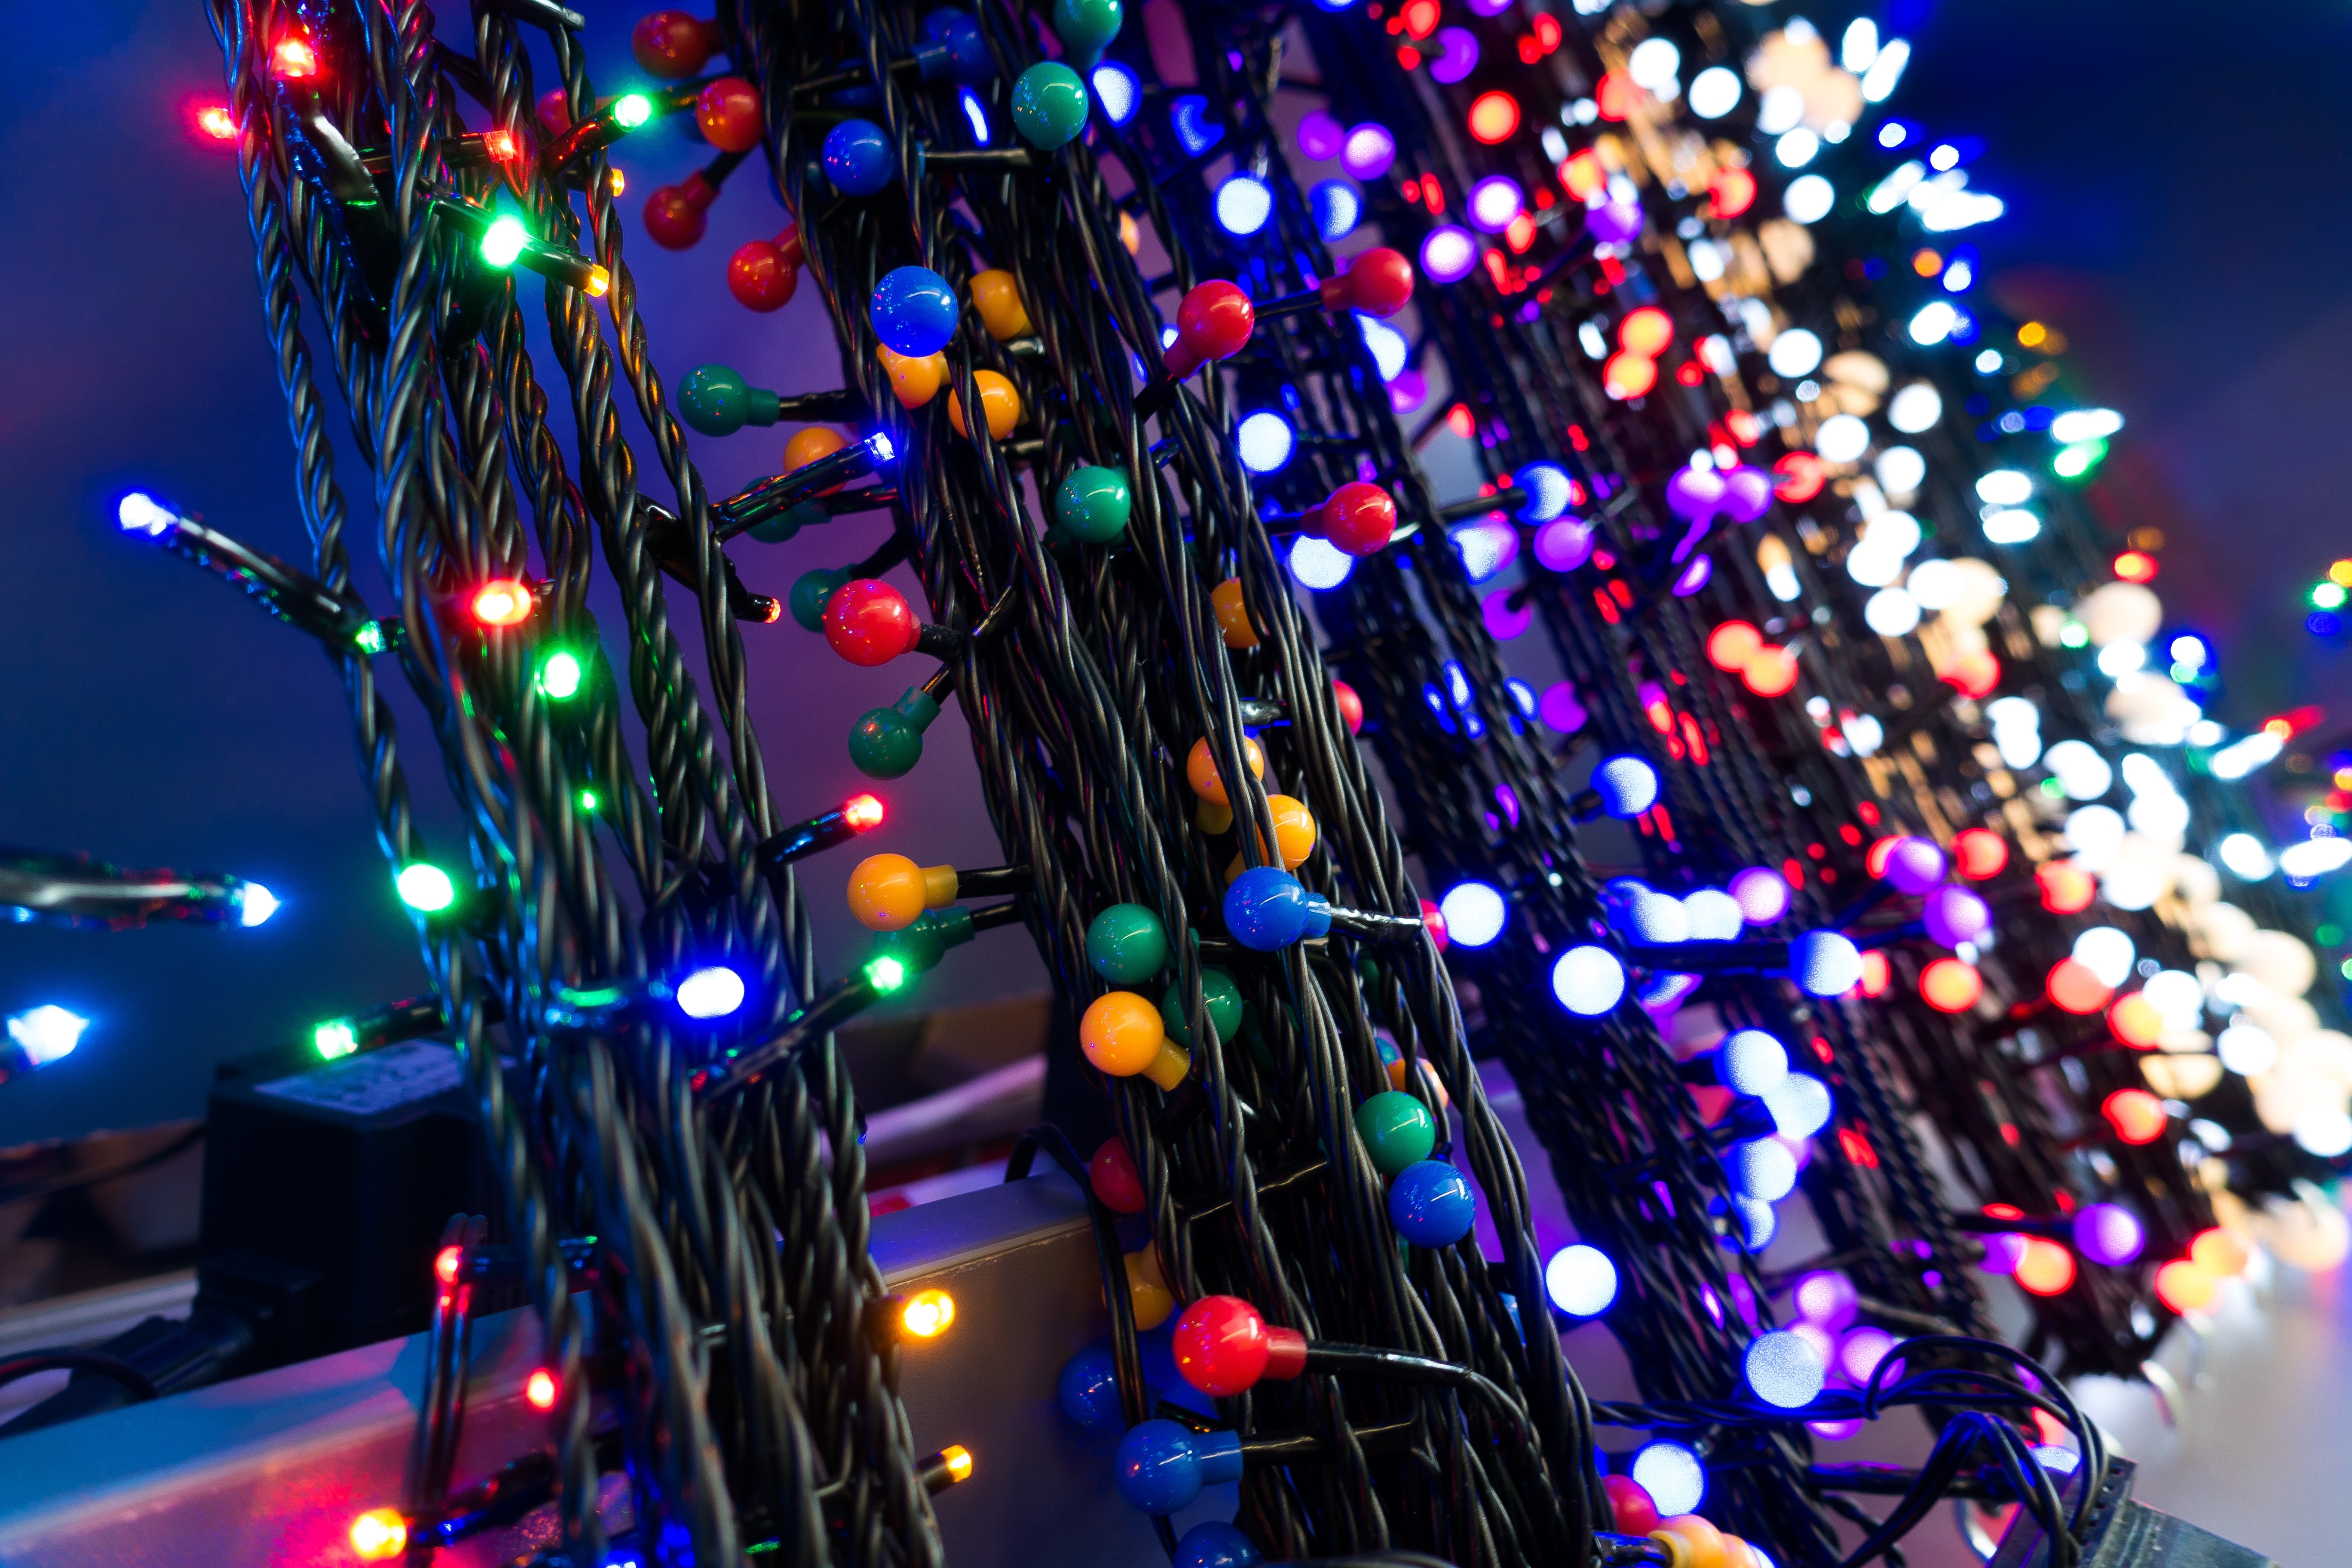 assorted color string lights during nighttime free image | Peakpx